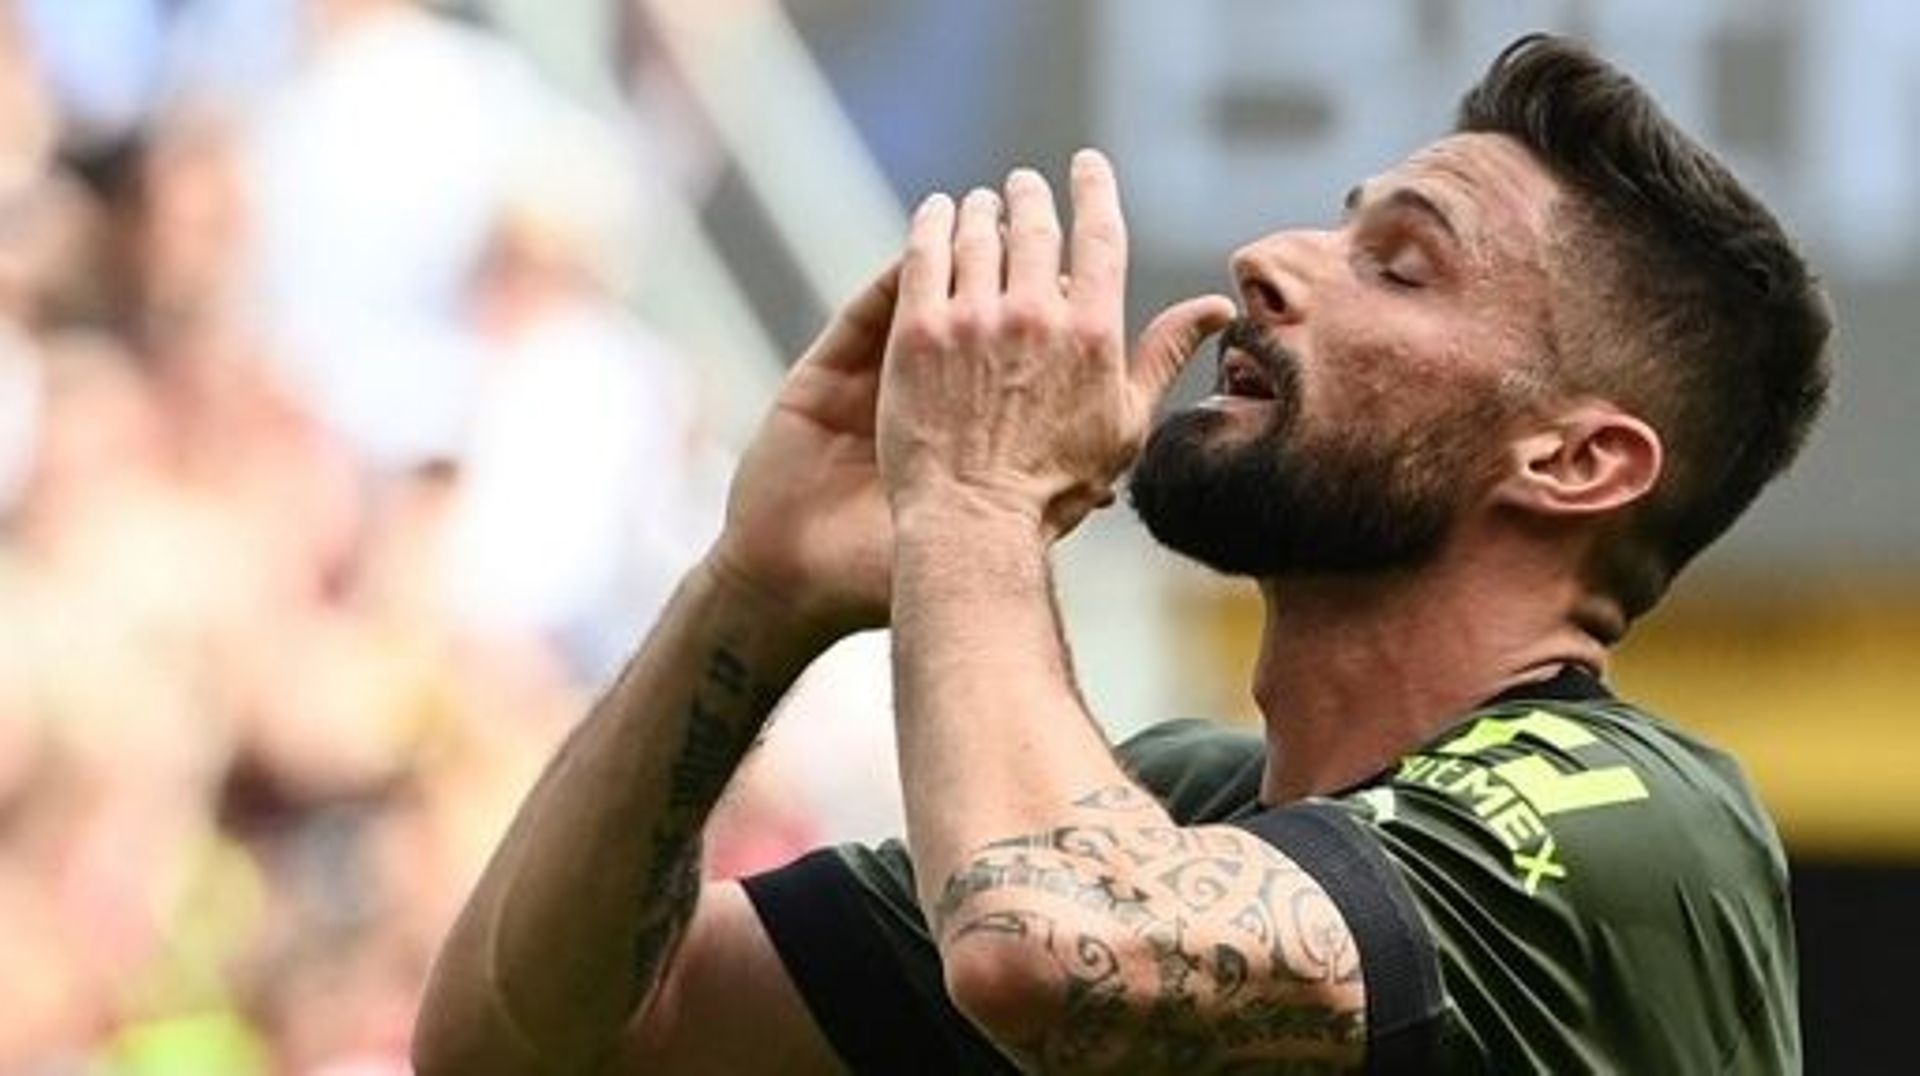 AC Milan’s French forward Olivier Giroud reacts after missing a goal opportunity during the Italian Serie A football match between AC Milan and Lazio on May 6, 2023 at the San Siro stadium in Milan. Isabella BONOTTO / AFP